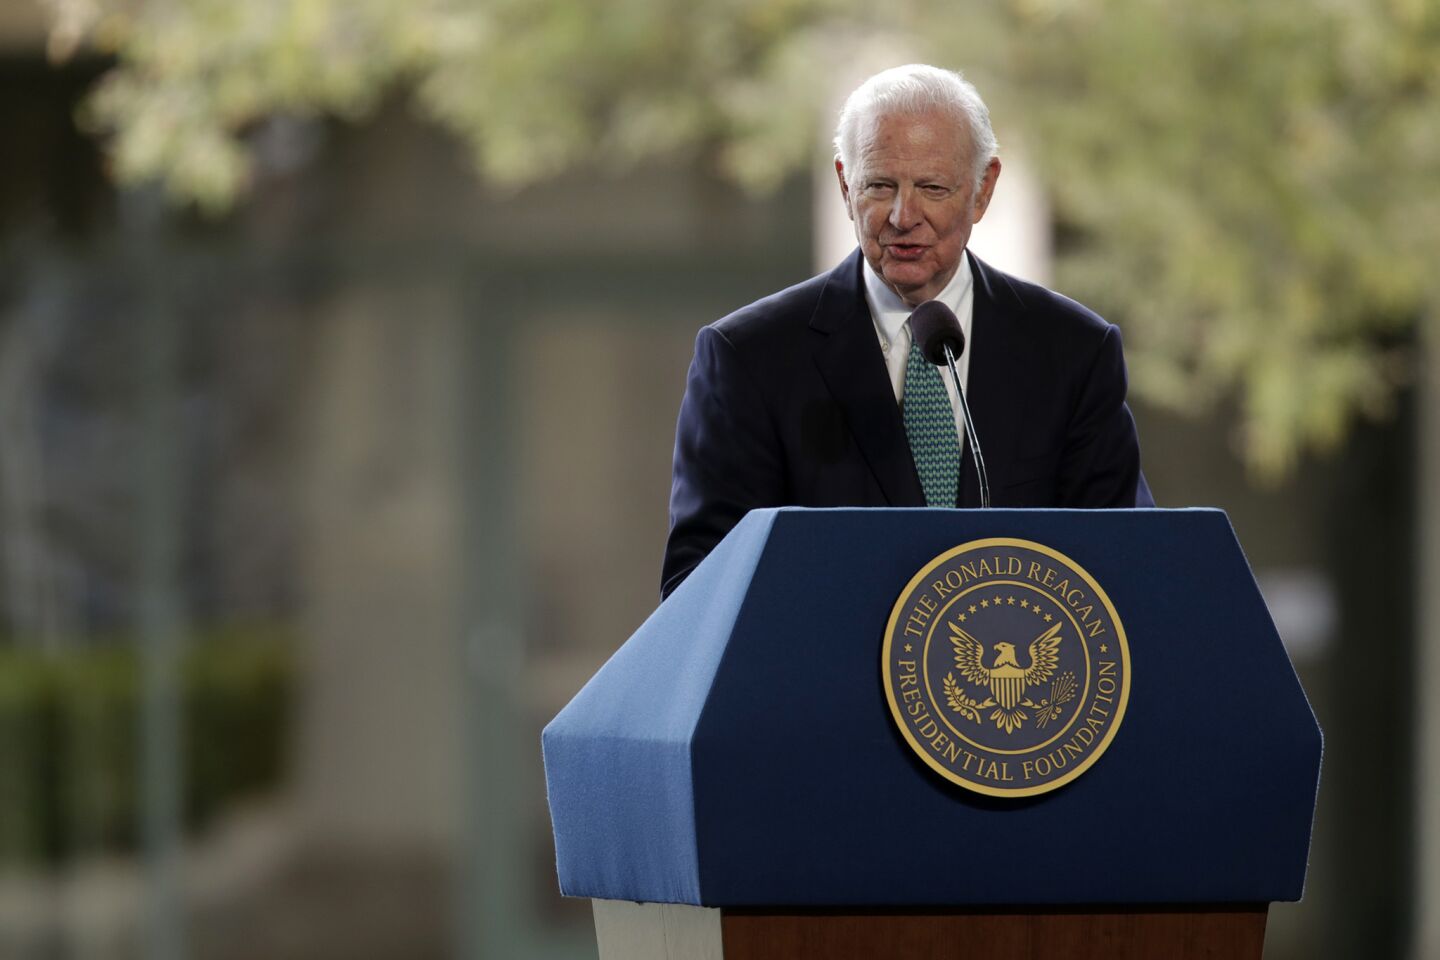 Former Secretary of State James Baker speaks at the funeral of former First Lady Nancy Reagan at the Ronald Reagan Presidential Library in Simi Valley.